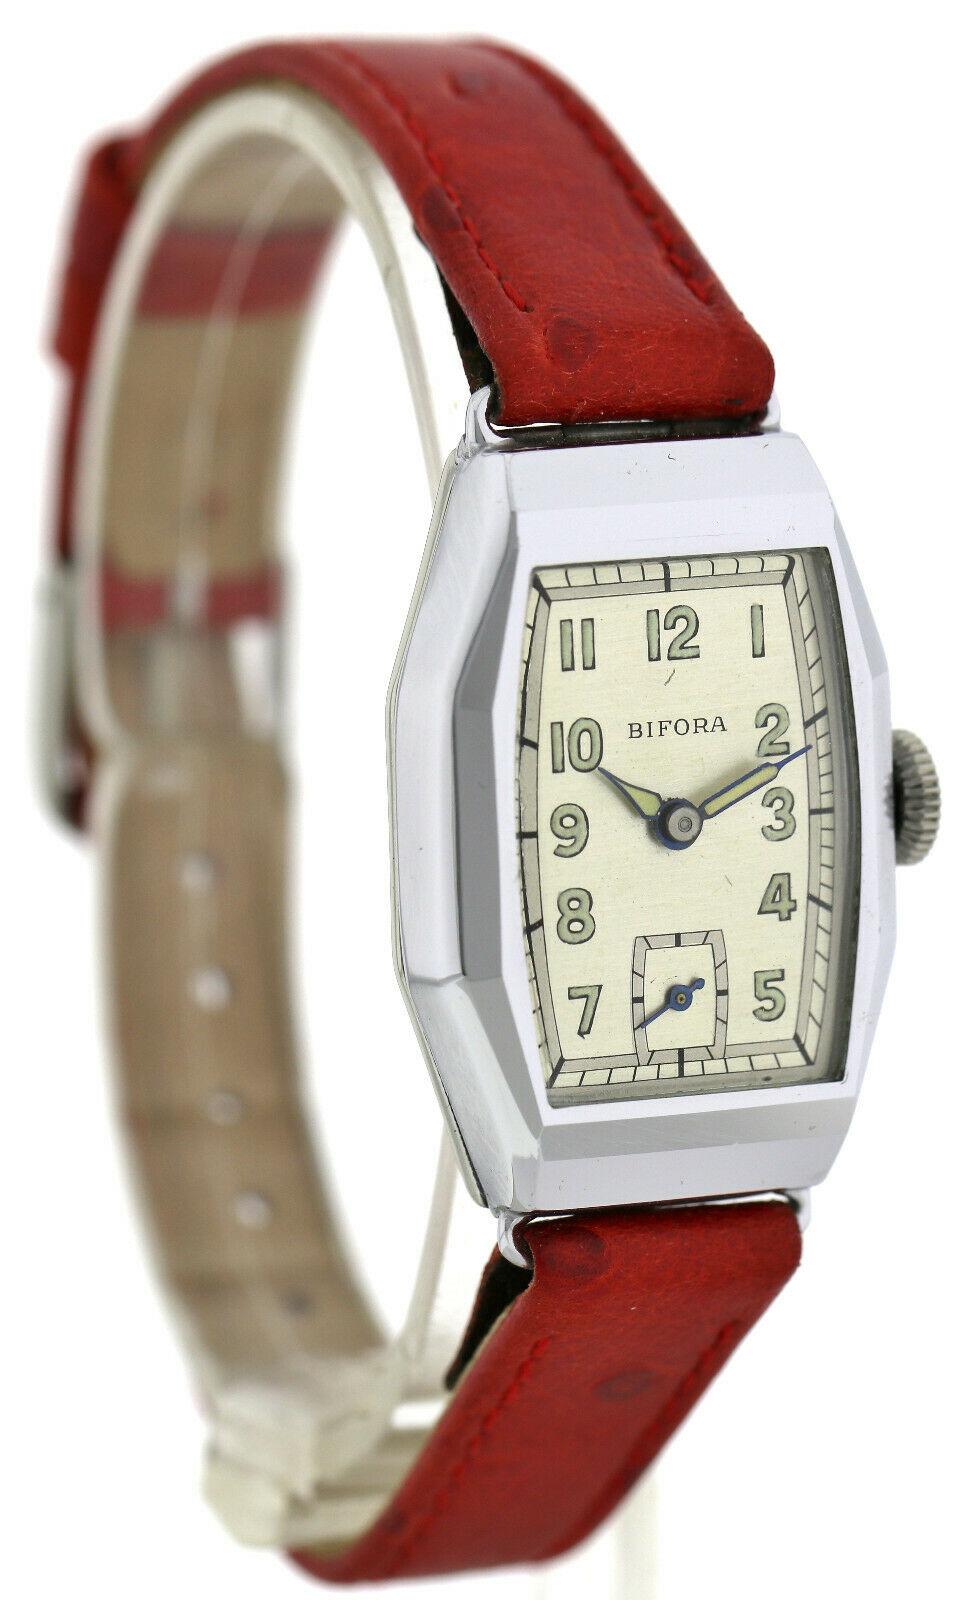 For those gents out there who desire a less than generic looking watch, who aspire for something not only classy but very distinctively Art Deco then this maybe the timepiece for you! A rare opportunity to acquire a perfect condition Art Deco Gents